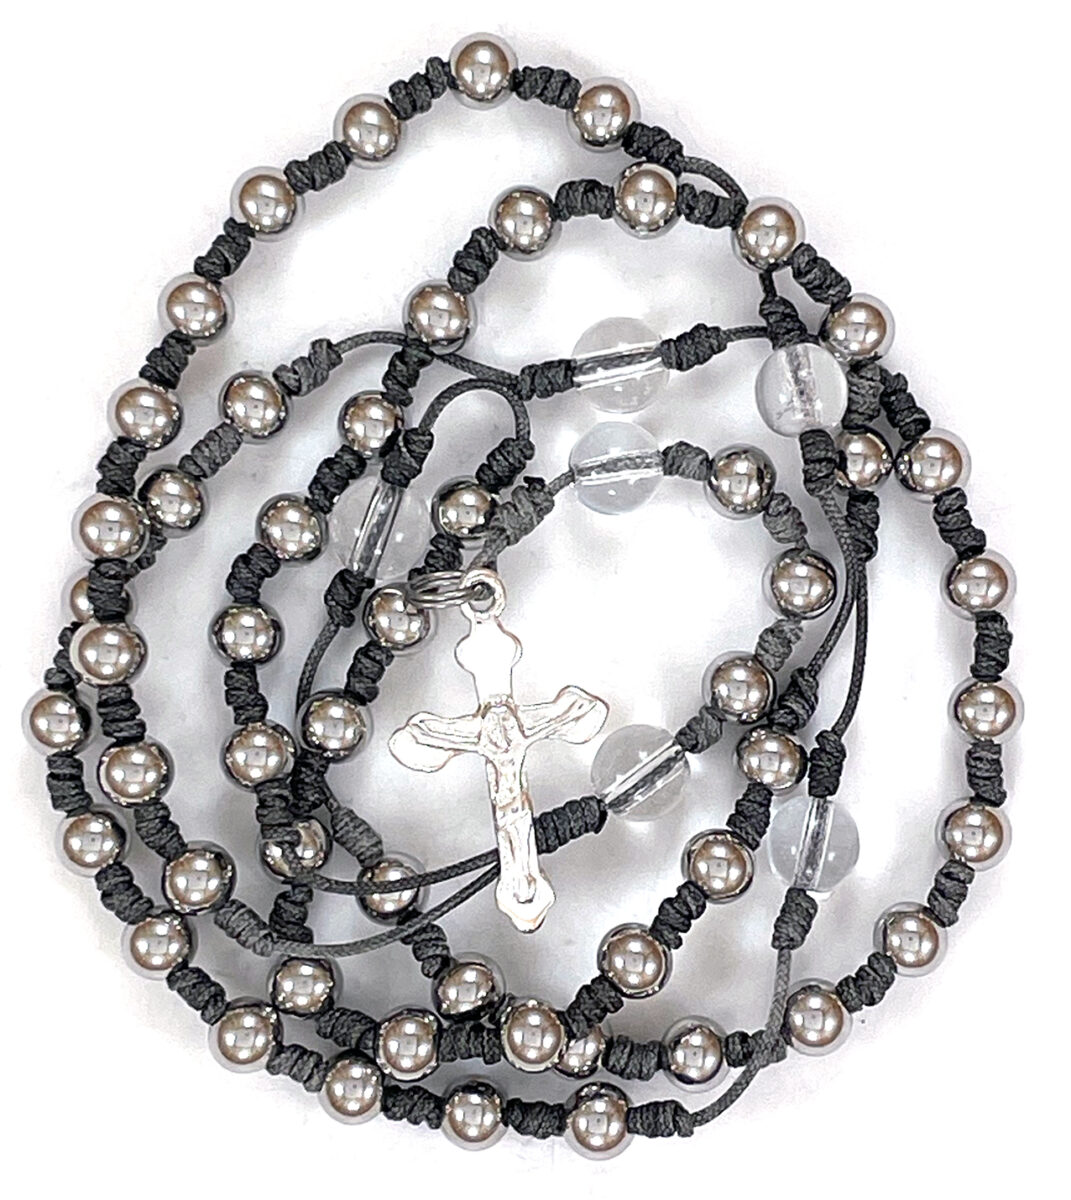 Delicate Paracord Rosary Necklace ($37.99 CAD)